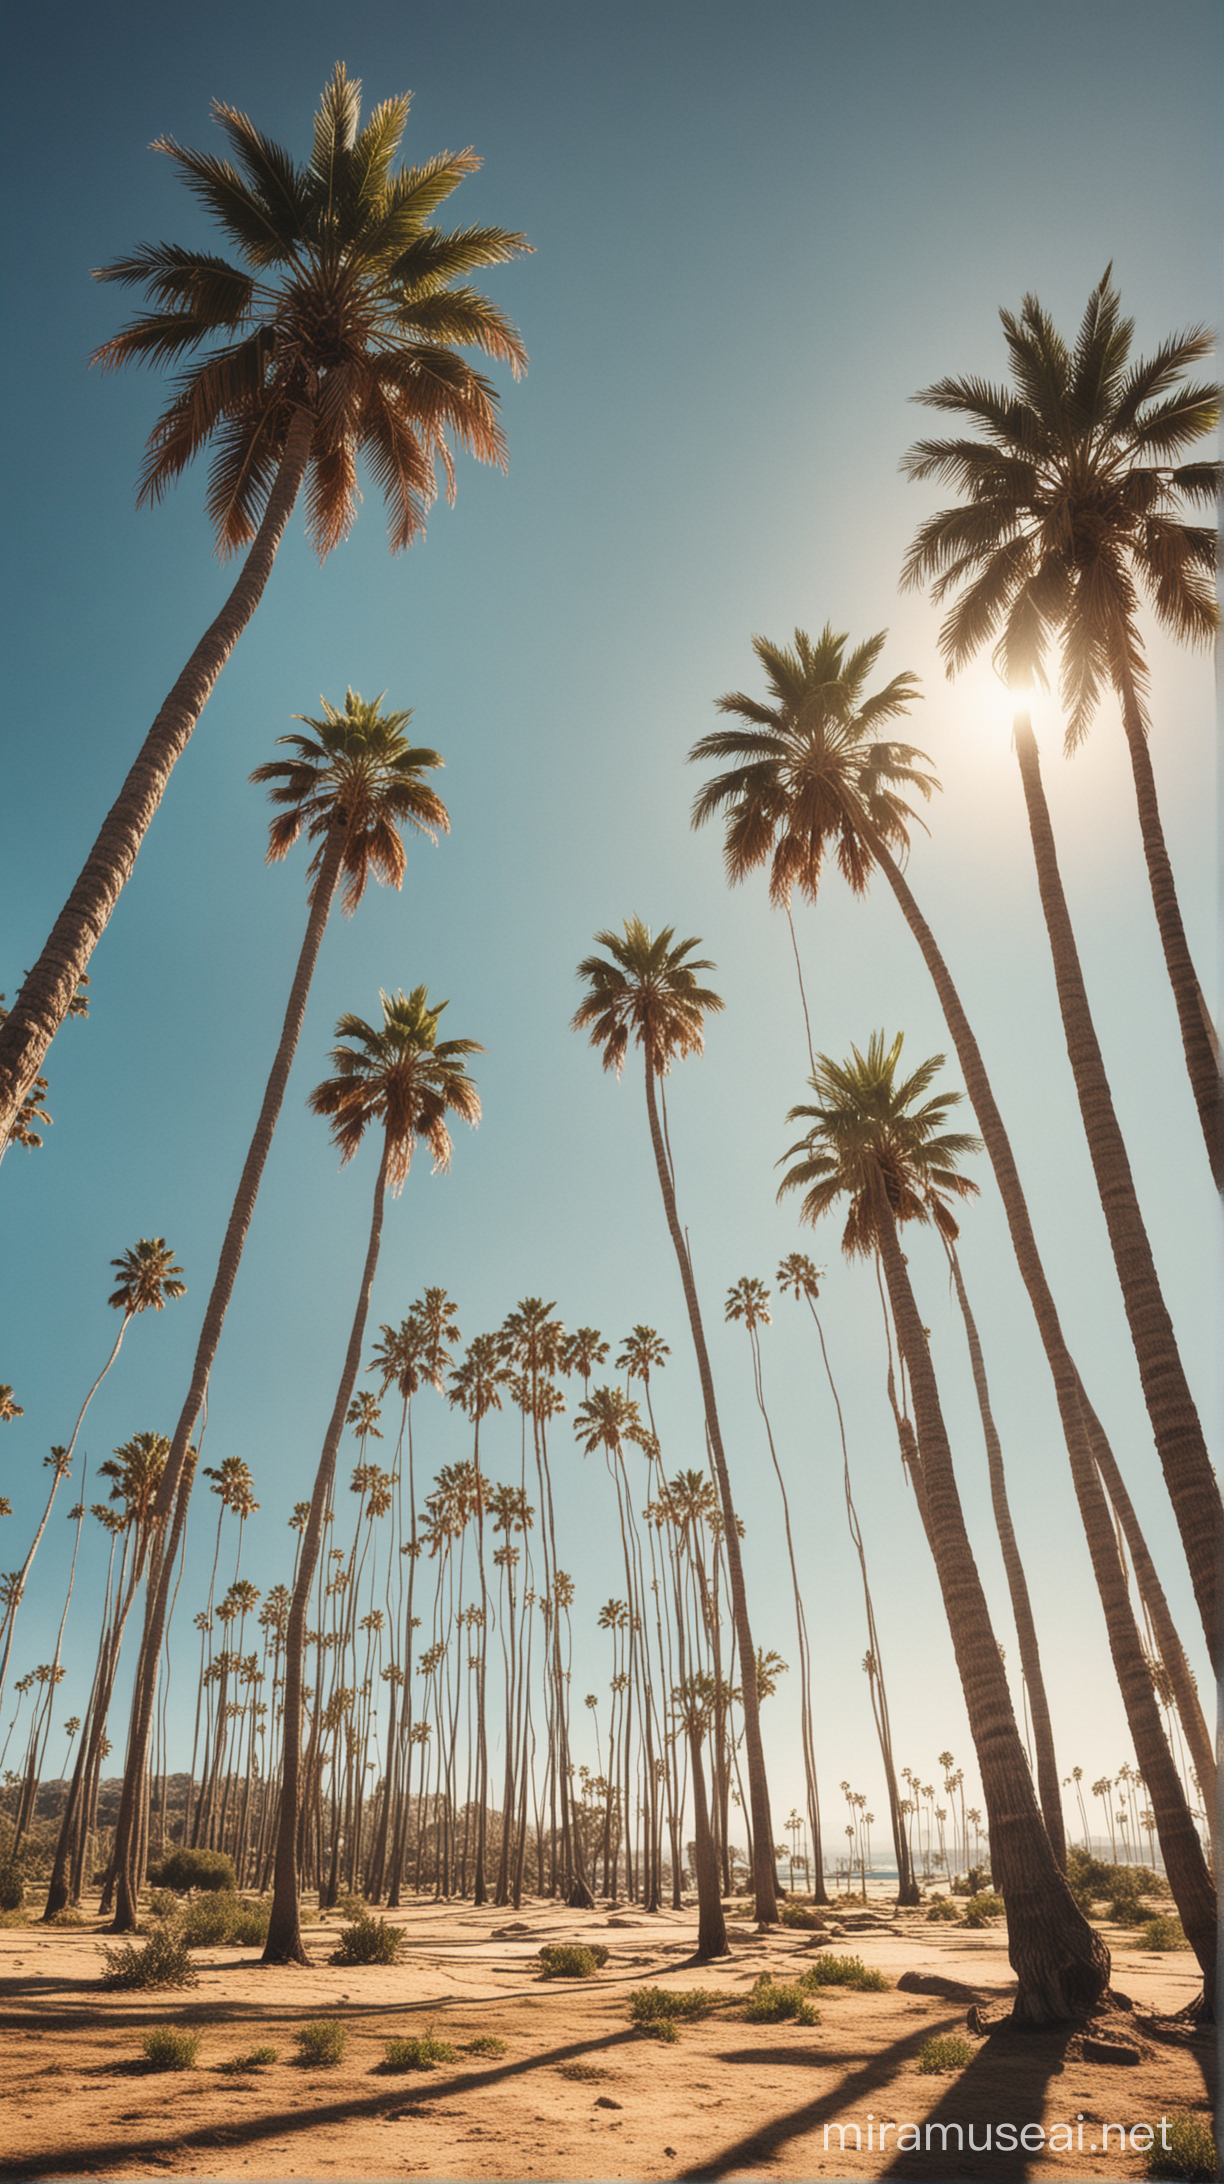 create a photo of California , lots of palm trees and sunshine